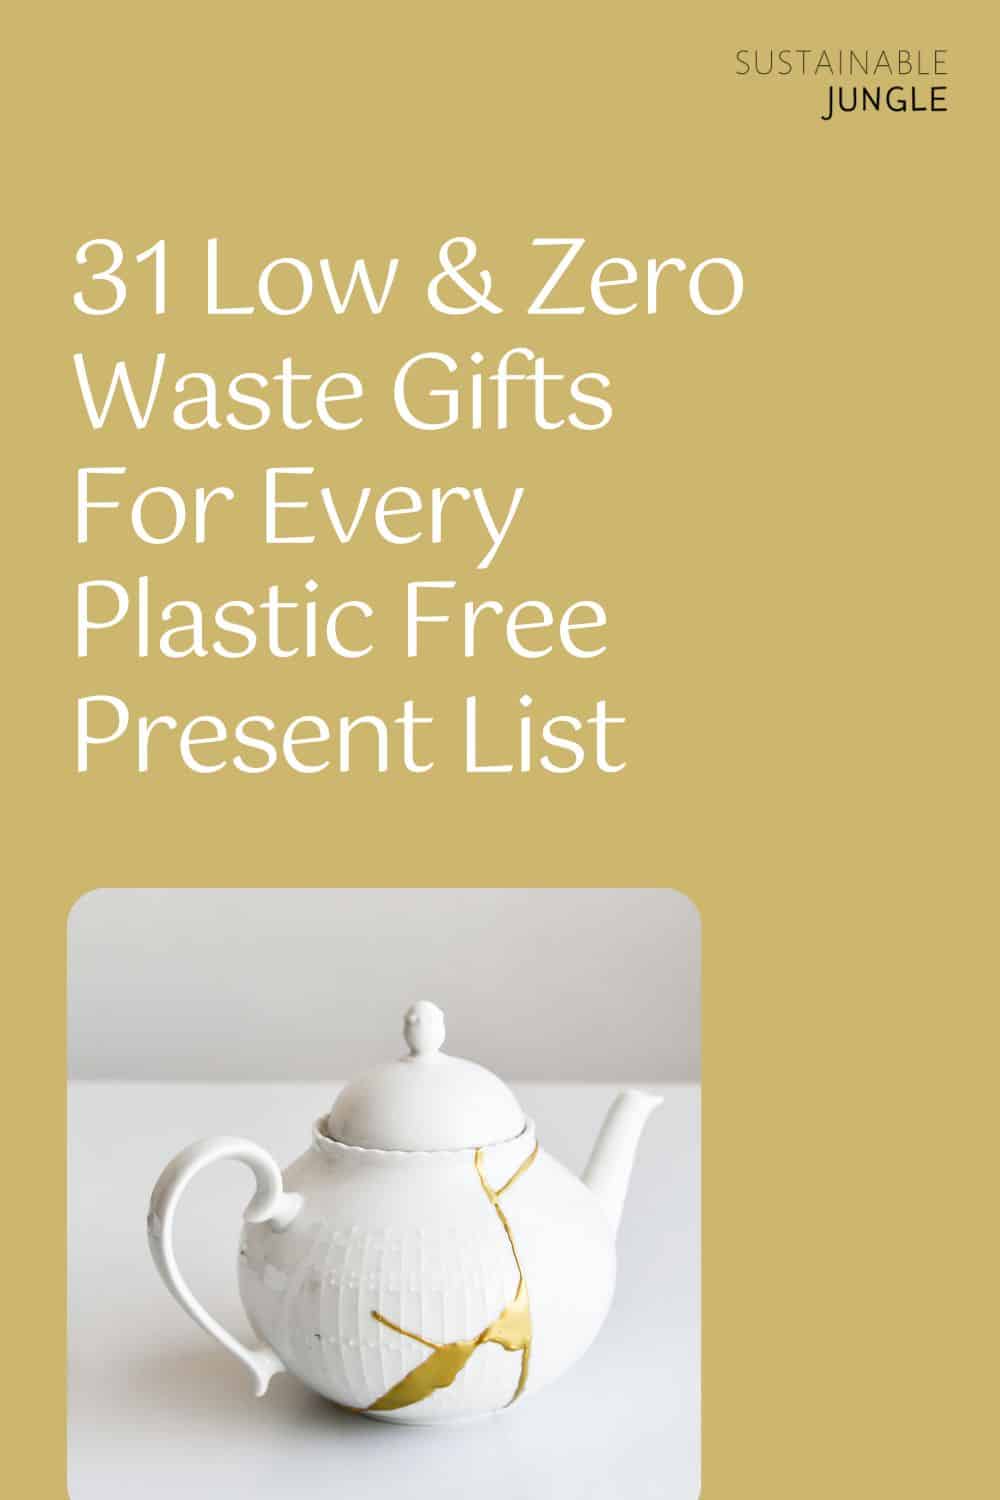 31 Low & Zero Waste Gifts For Every Plastic Free Present List Image by Sugru #zerowastegifts #sustainablejungle